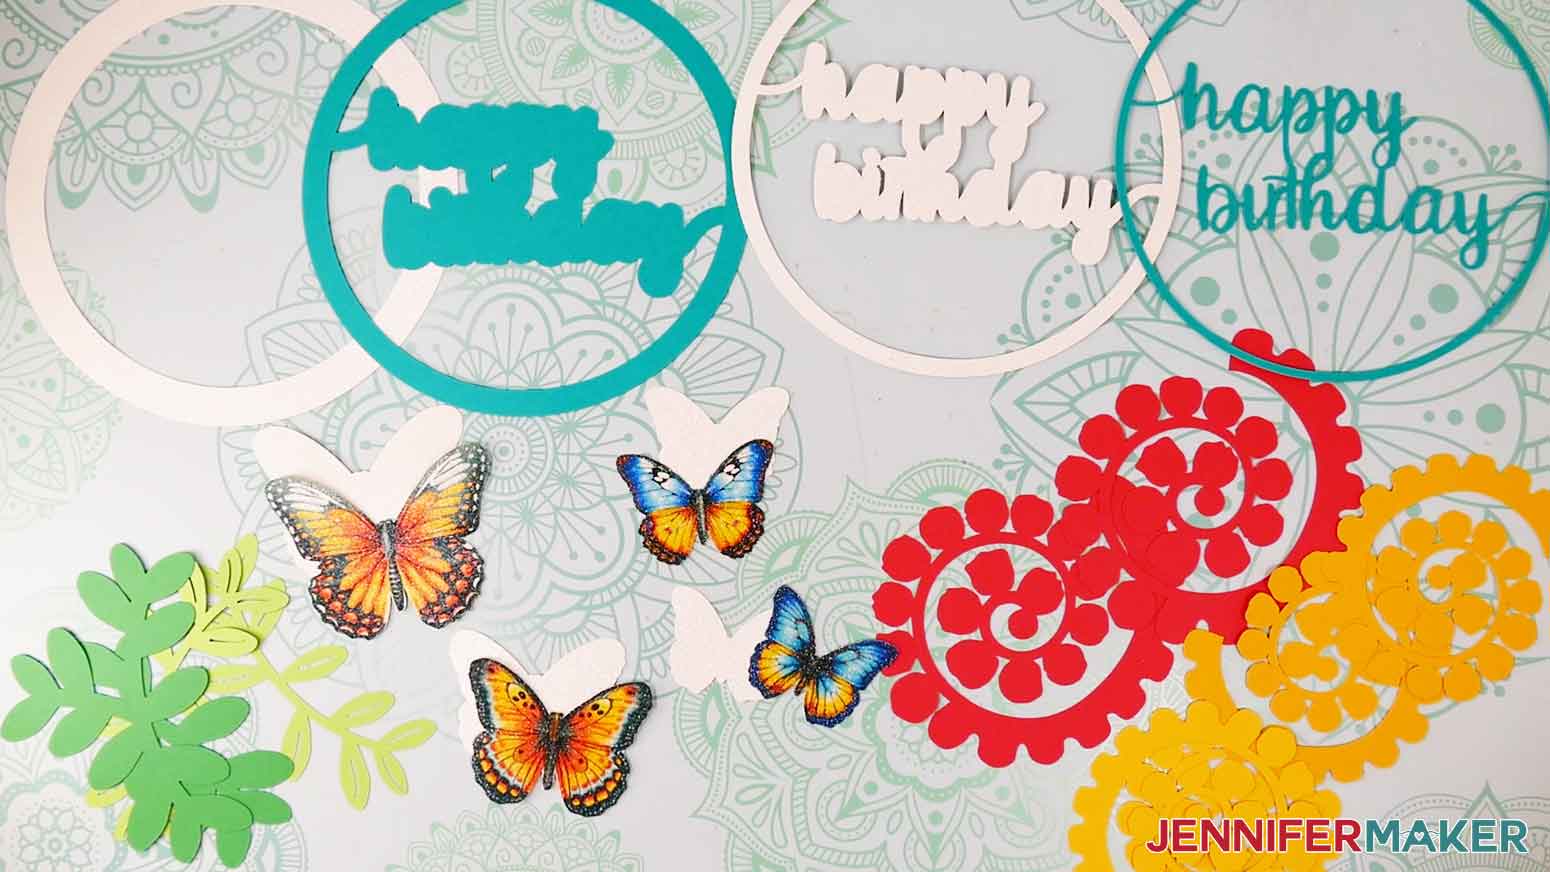 Display of all of the sublimated and cut pieces for the butterfly birthday cake topper.